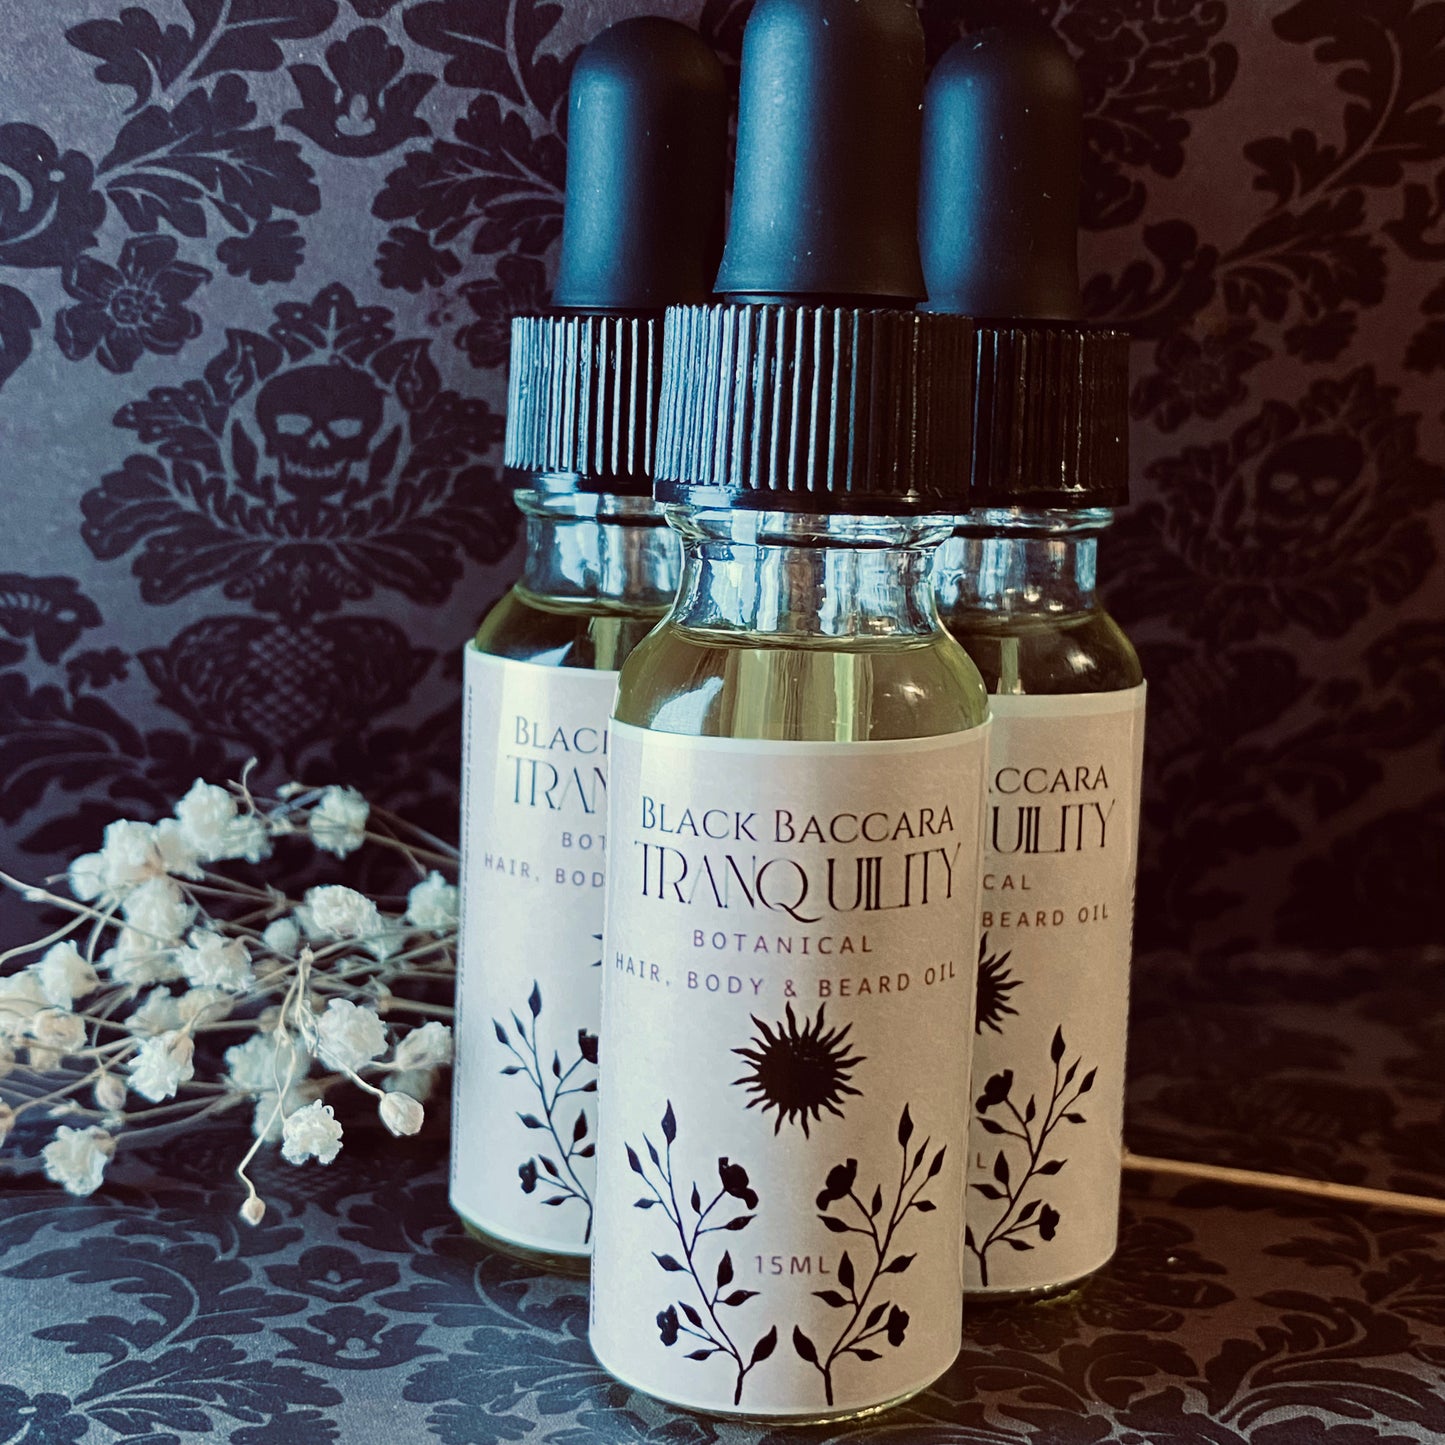 Tranquility Multi-Use Botanical Hair, Beard, And Body Oil (One Extra From Archive)